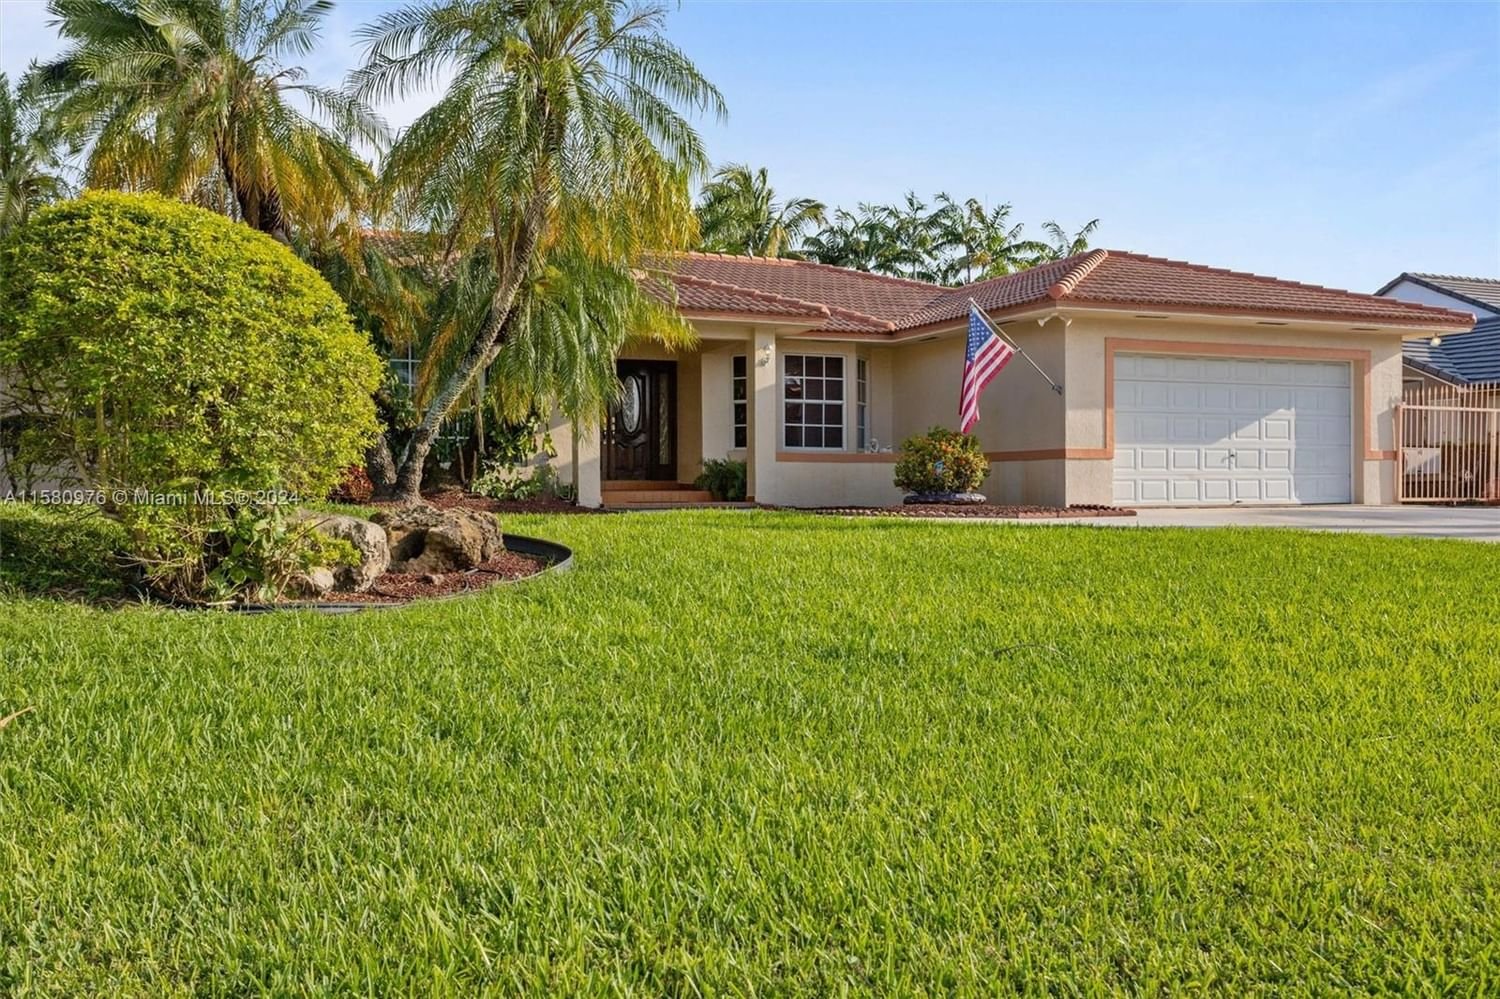 Real estate property located at 10440 131st St, Miami-Dade County, RO-JEN ESTATES, Hialeah Gardens, FL